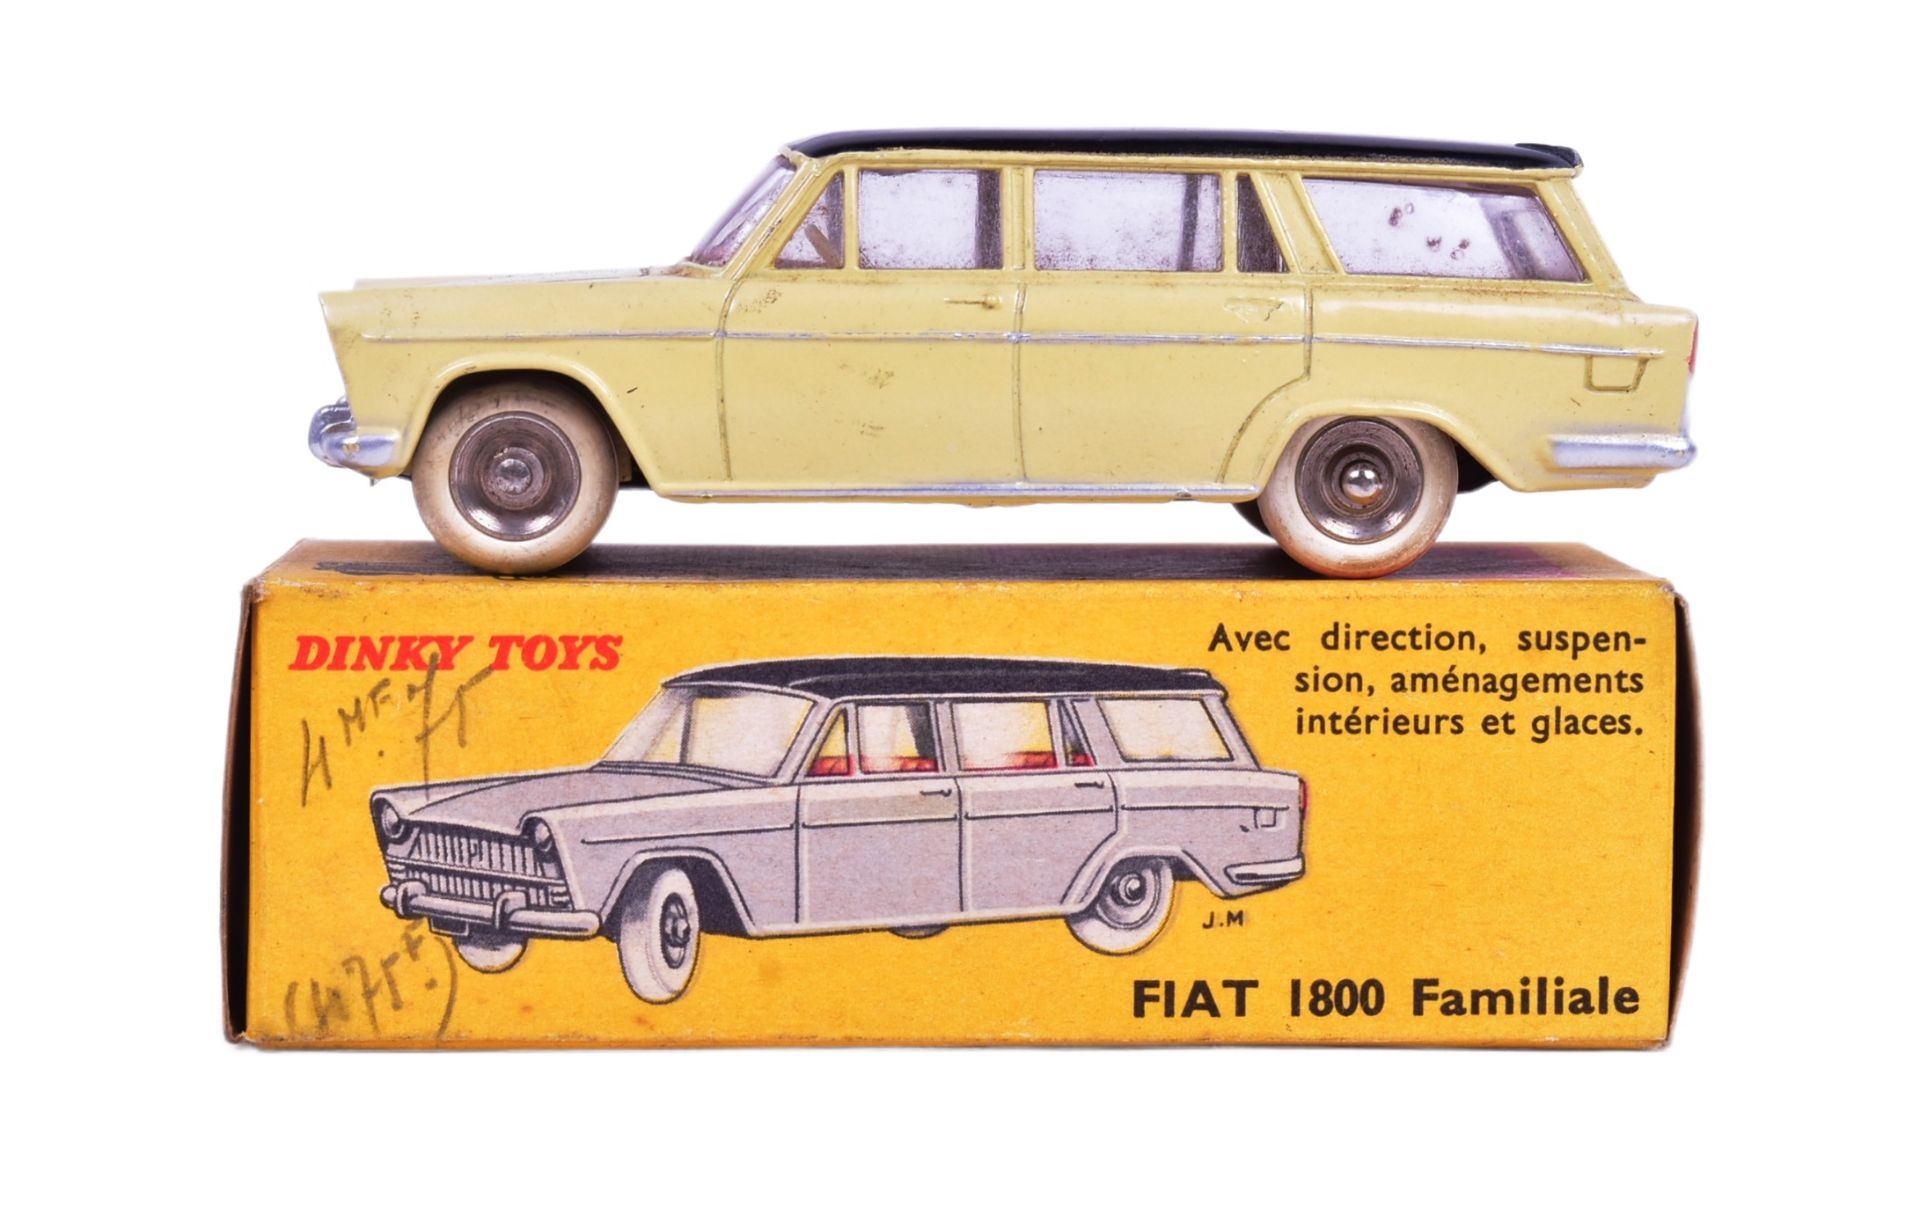 DIECAST - FRENCH DINKY TOYS - FIAT 1800 FAMILIALE